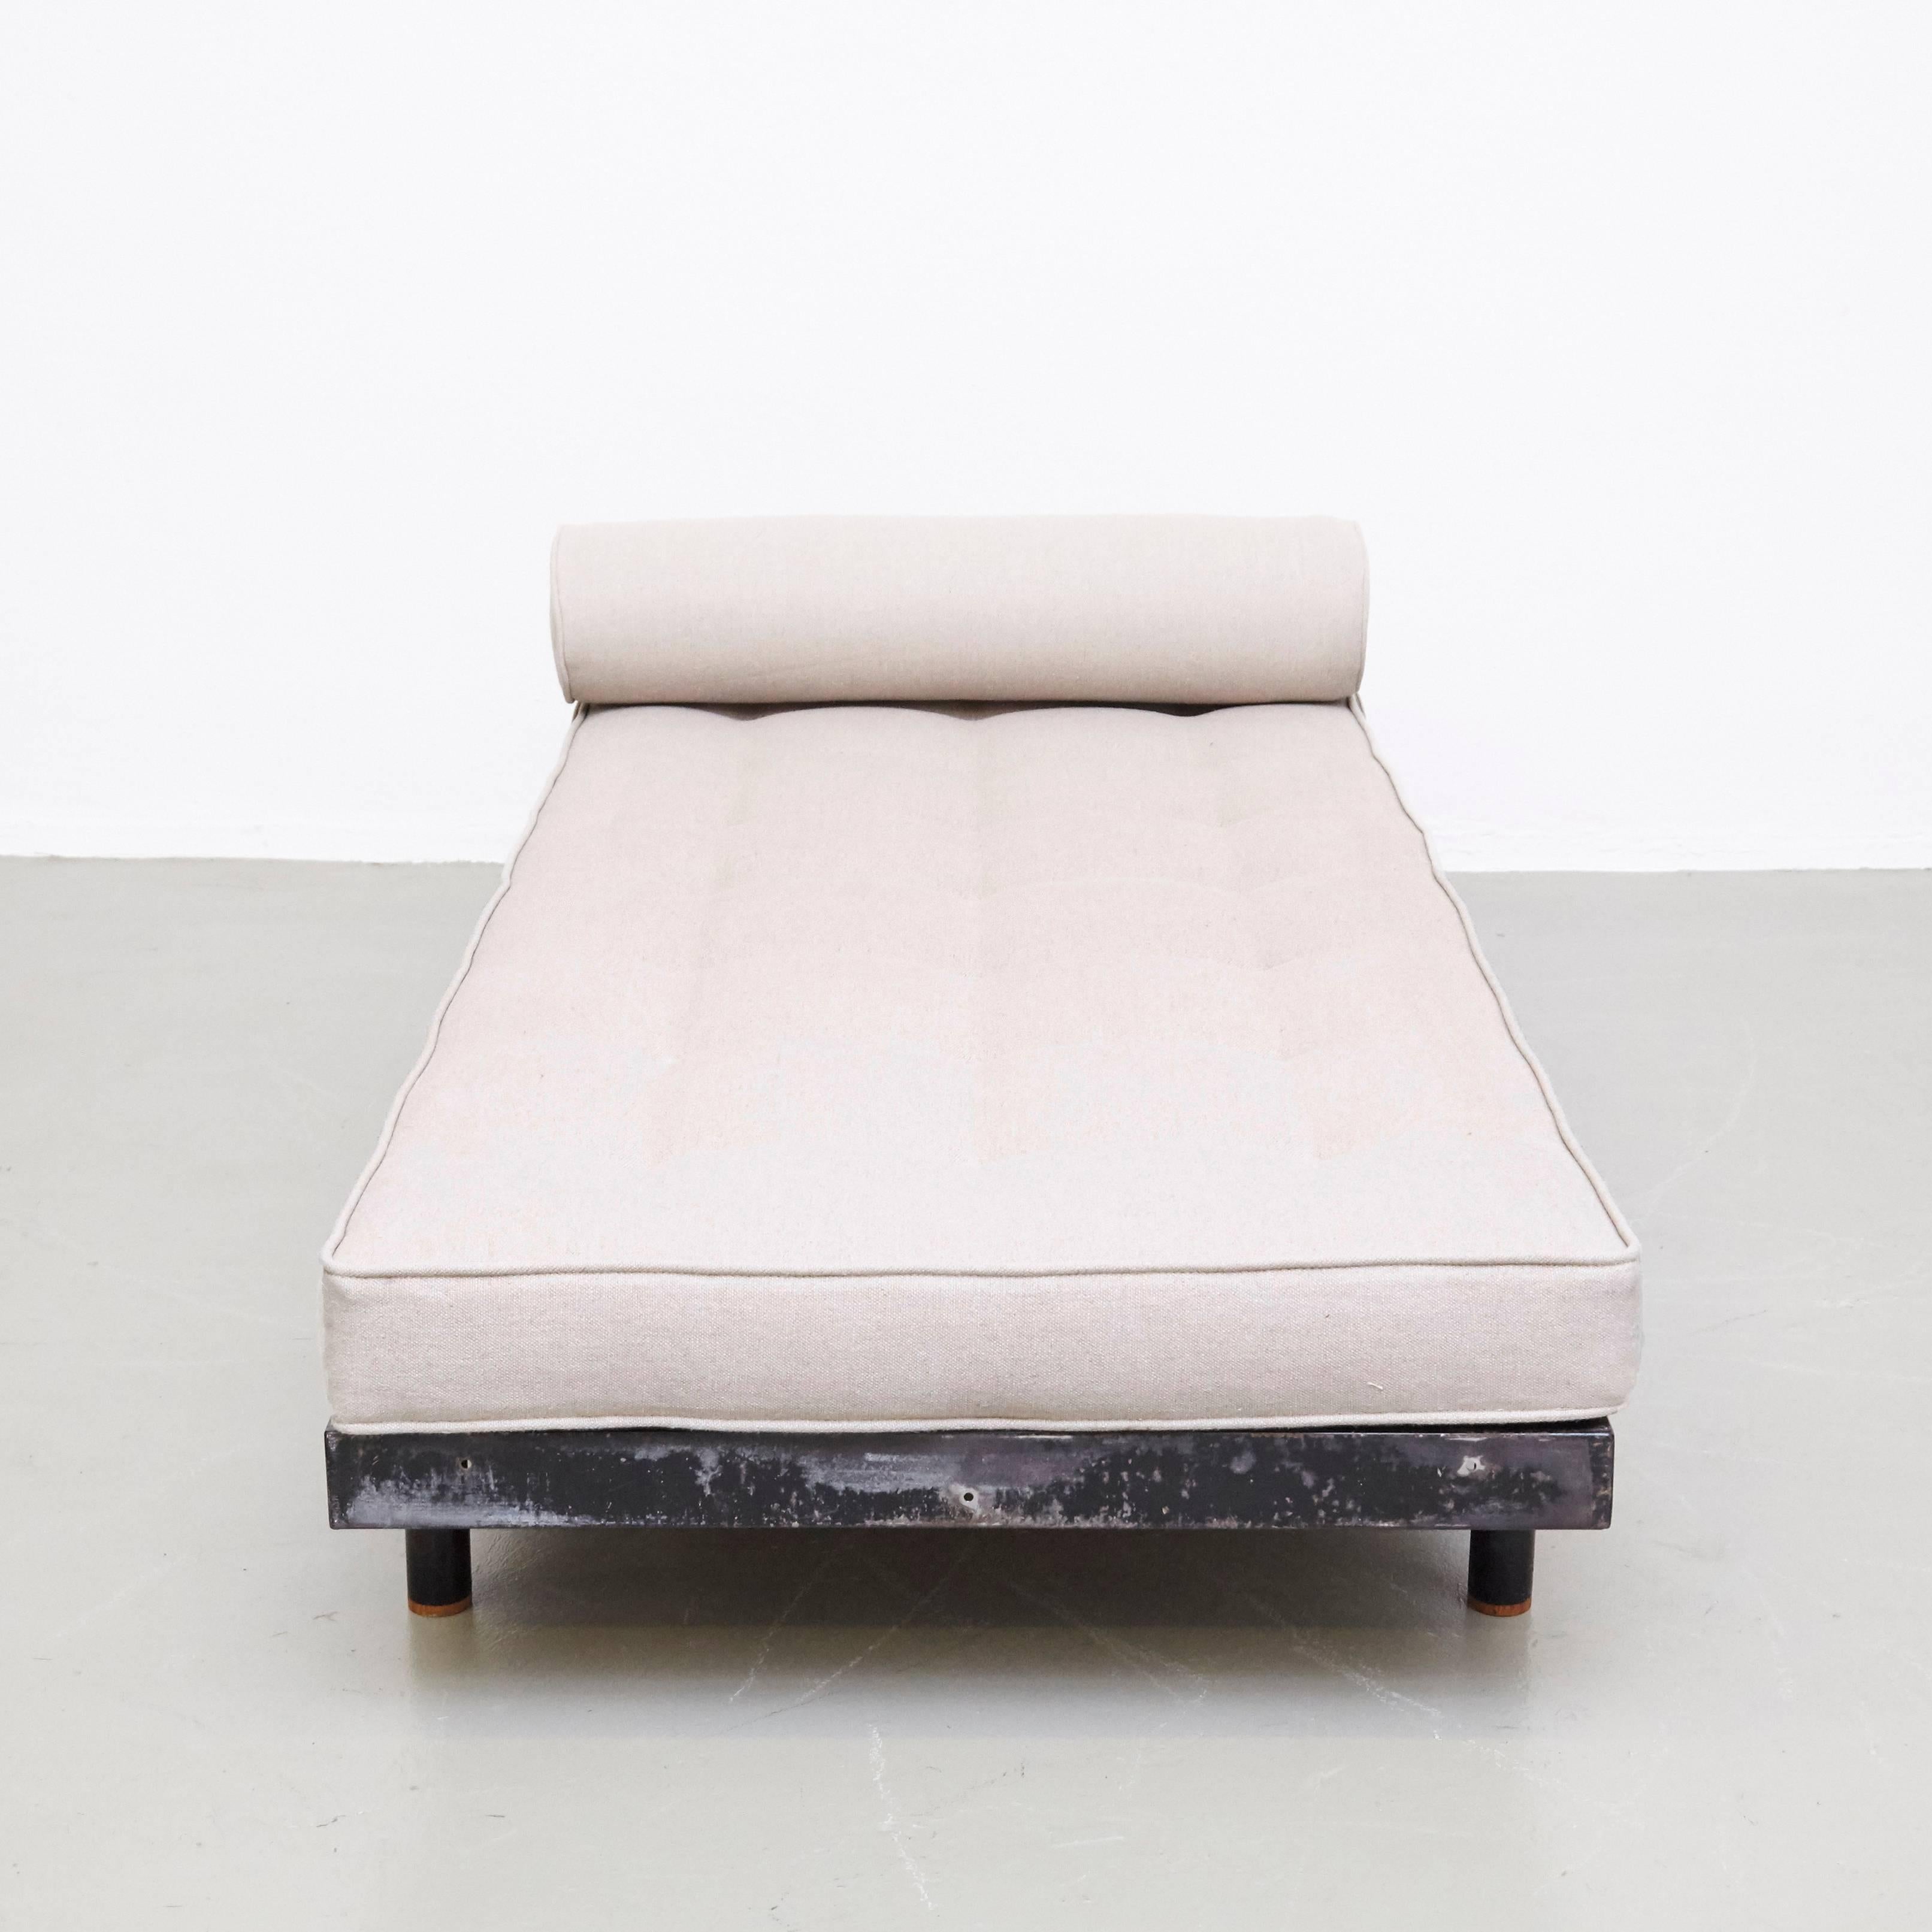 Jean Prouve Mid Century Modern Metal Upholstery SCAL French Daybed, circa 1950 (Französisch)